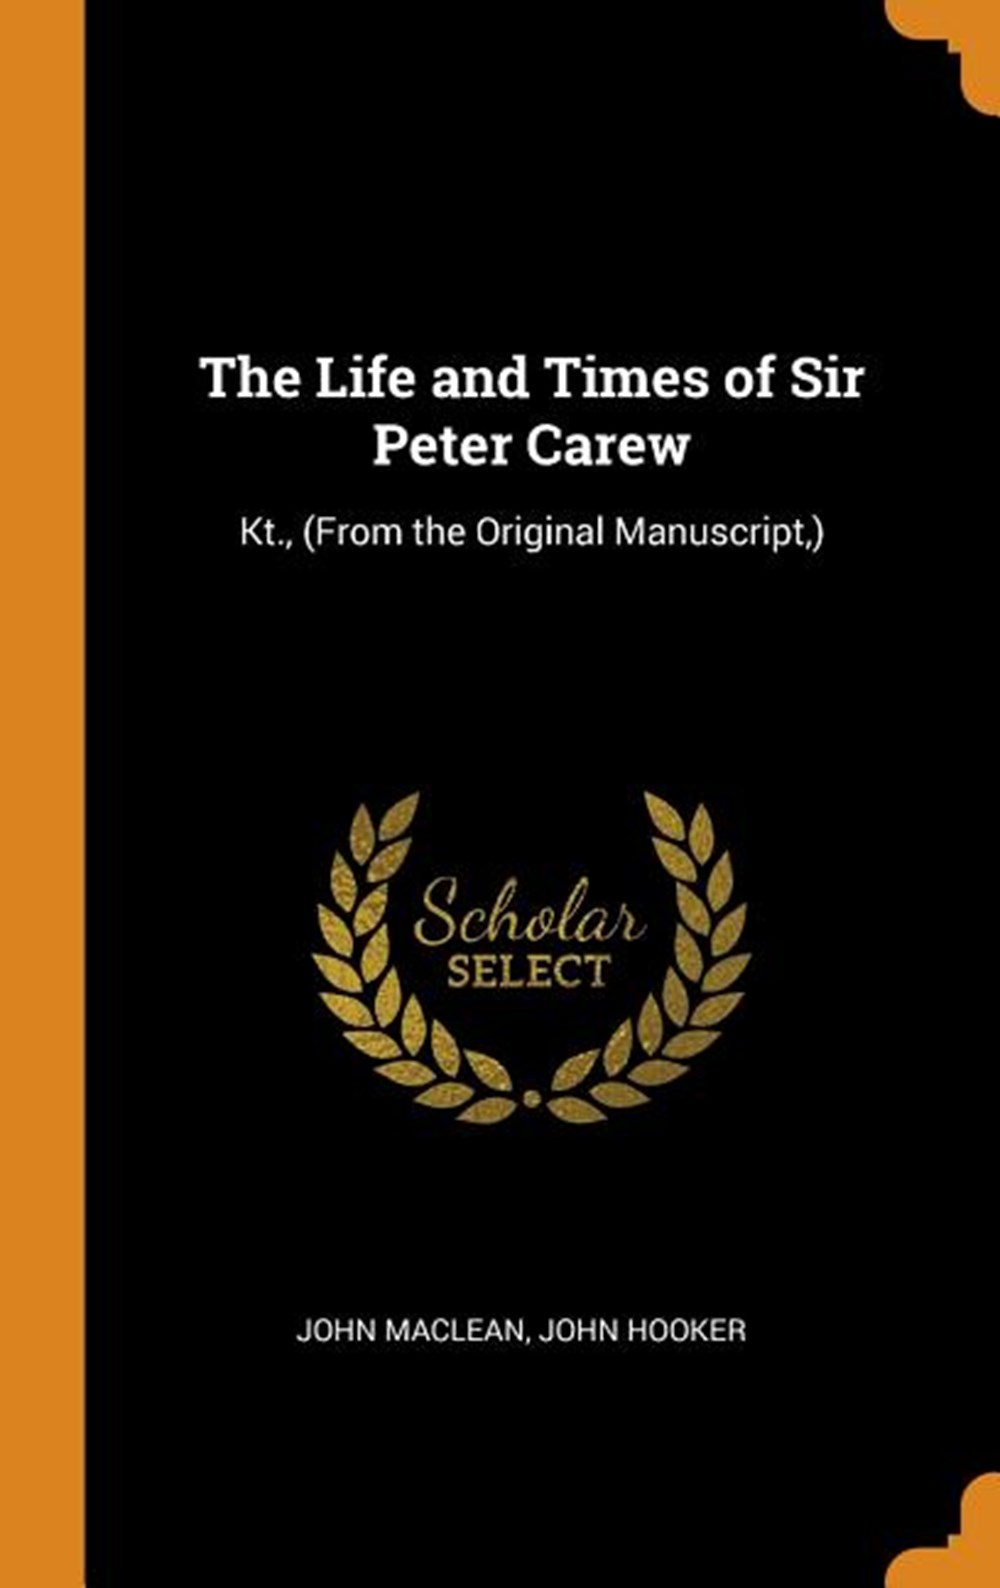 Life and Times of Sir Peter Carew: Kt., (from the Original Manuscript, )